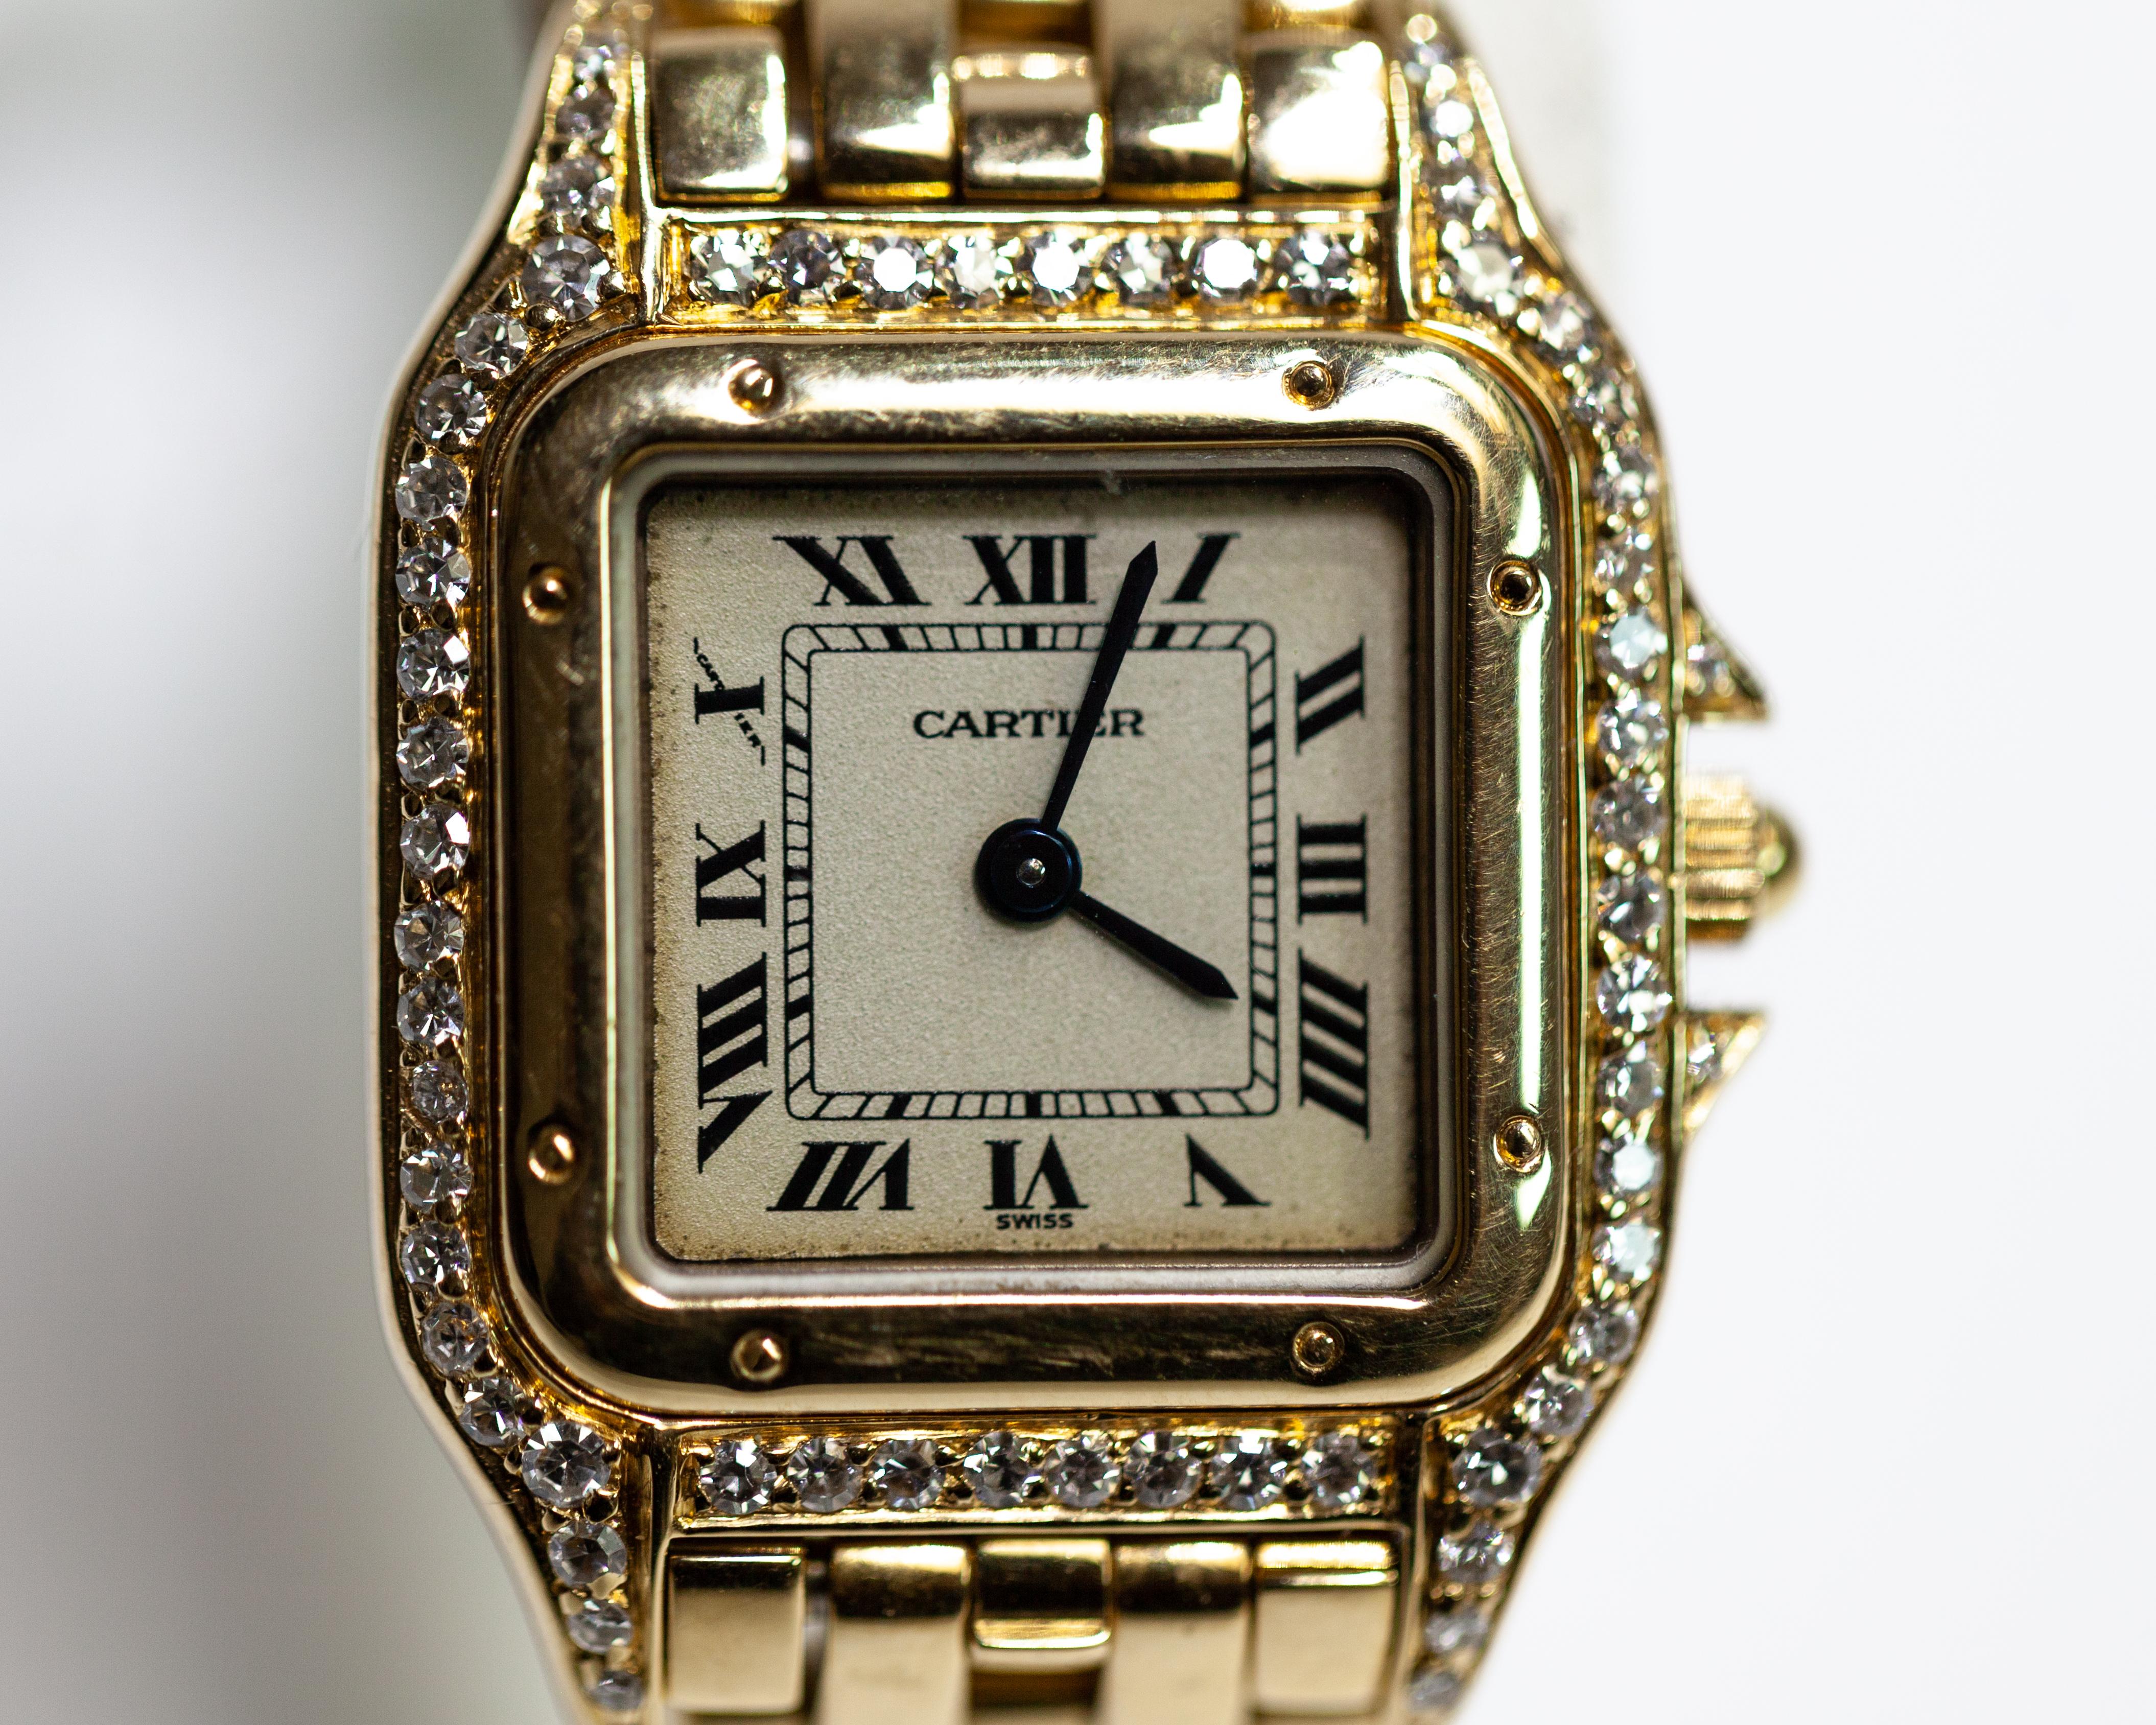 BASIC INFO
Listing number	NB00001
Reference number	WGPN0007
Brand	                Cartier
Model	                Panthere
Movement	        Quartz
Case Material	        Gold 18K
Bracelet material	Gold 18K

Condition Good (Light signs of wear or